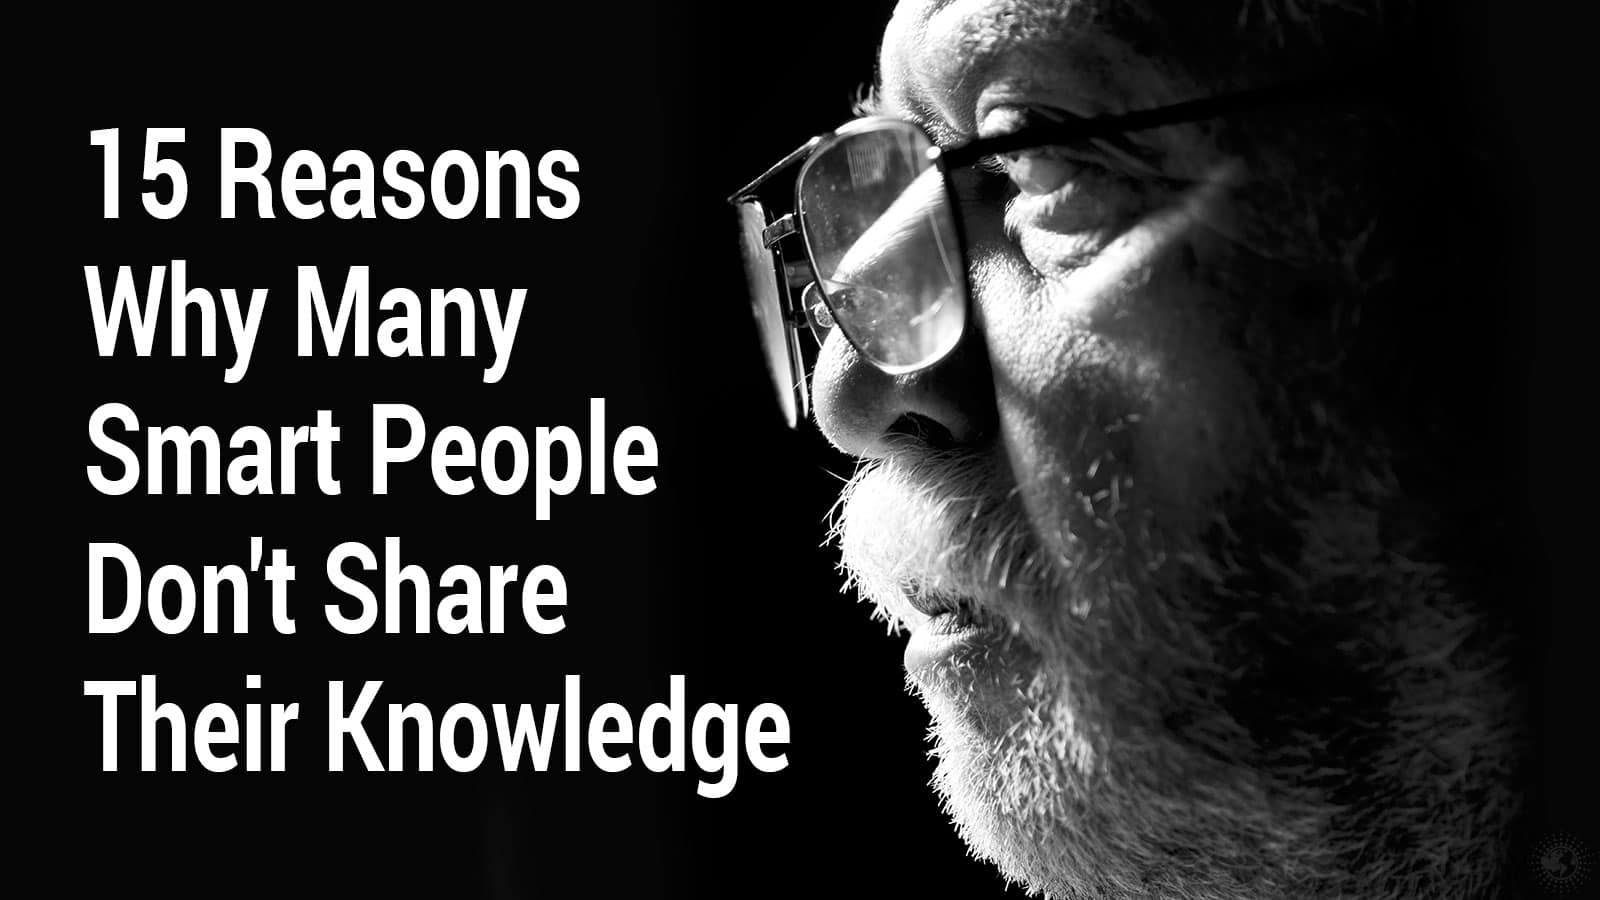 15 Reasons Why Many Smart People Don’t Share Their Knowledge